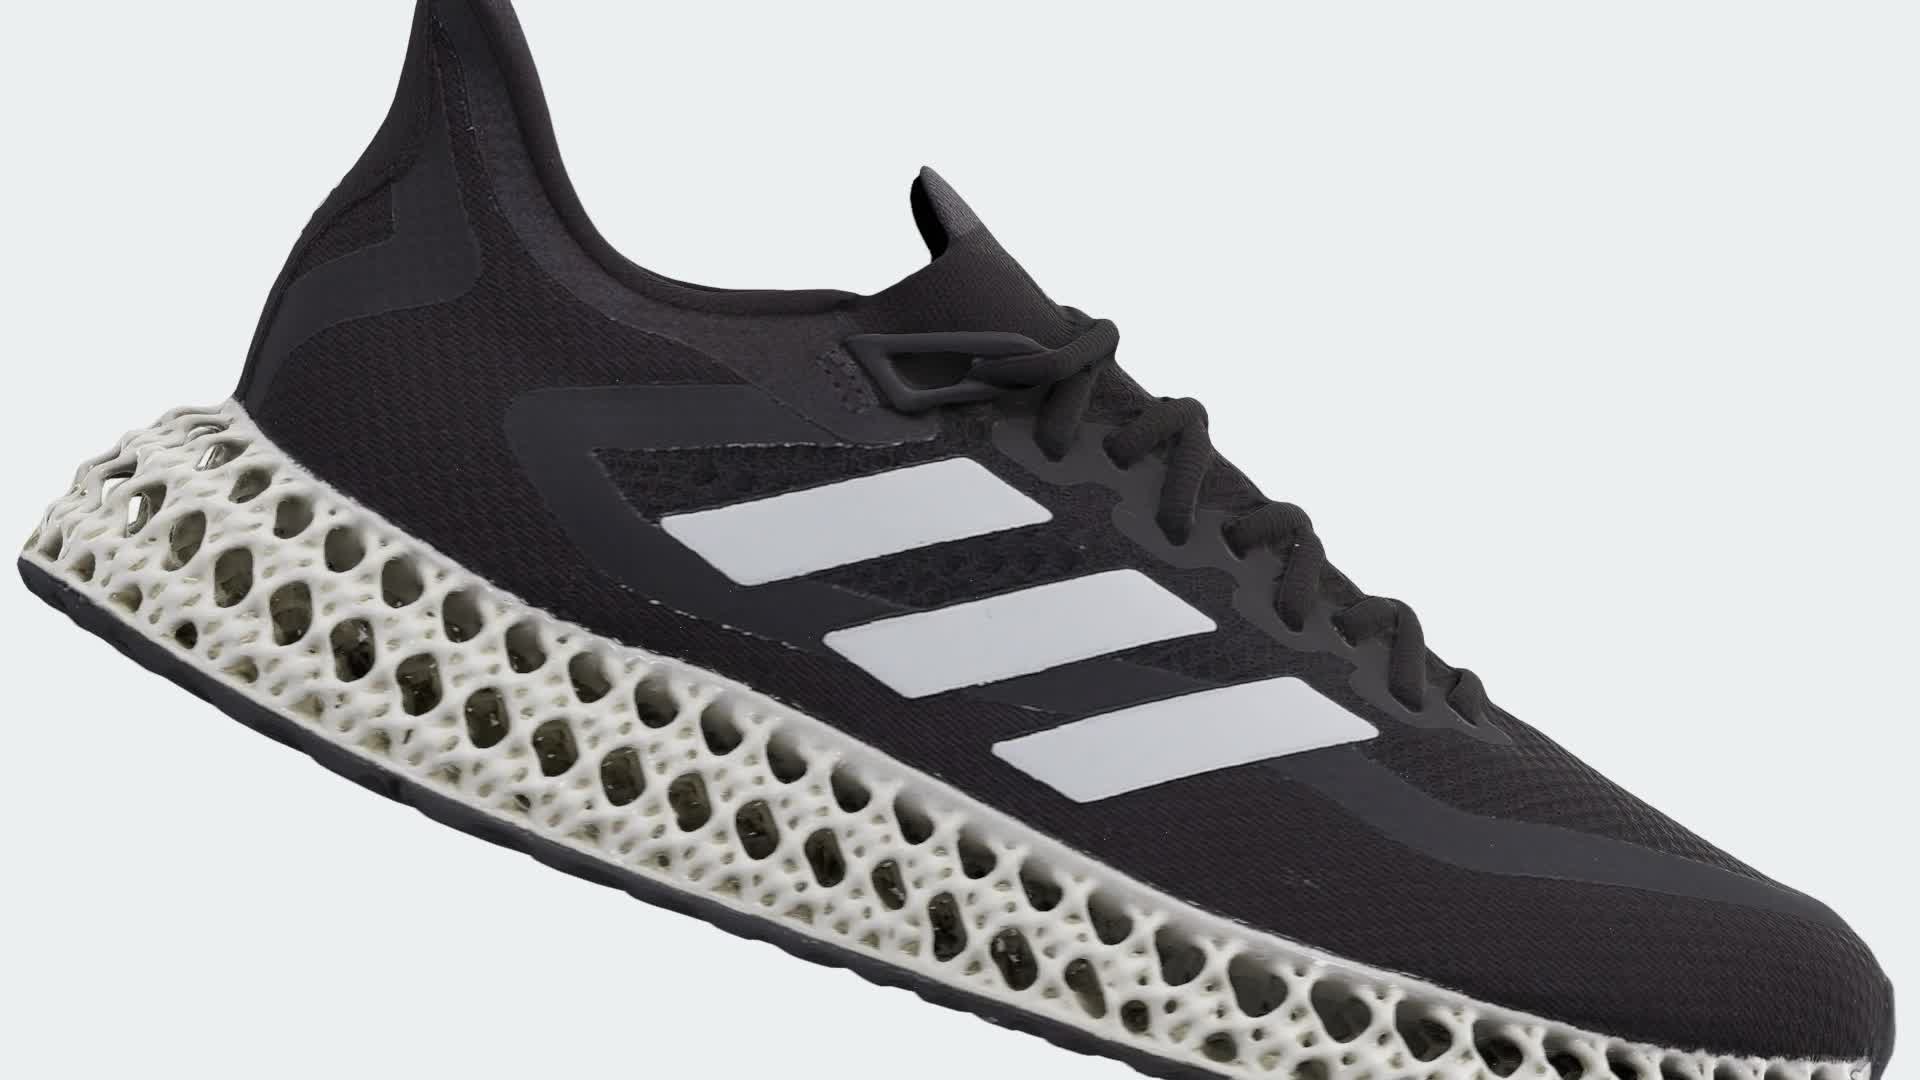 Adidas unveils the new 4DFWD forward motion running shoe